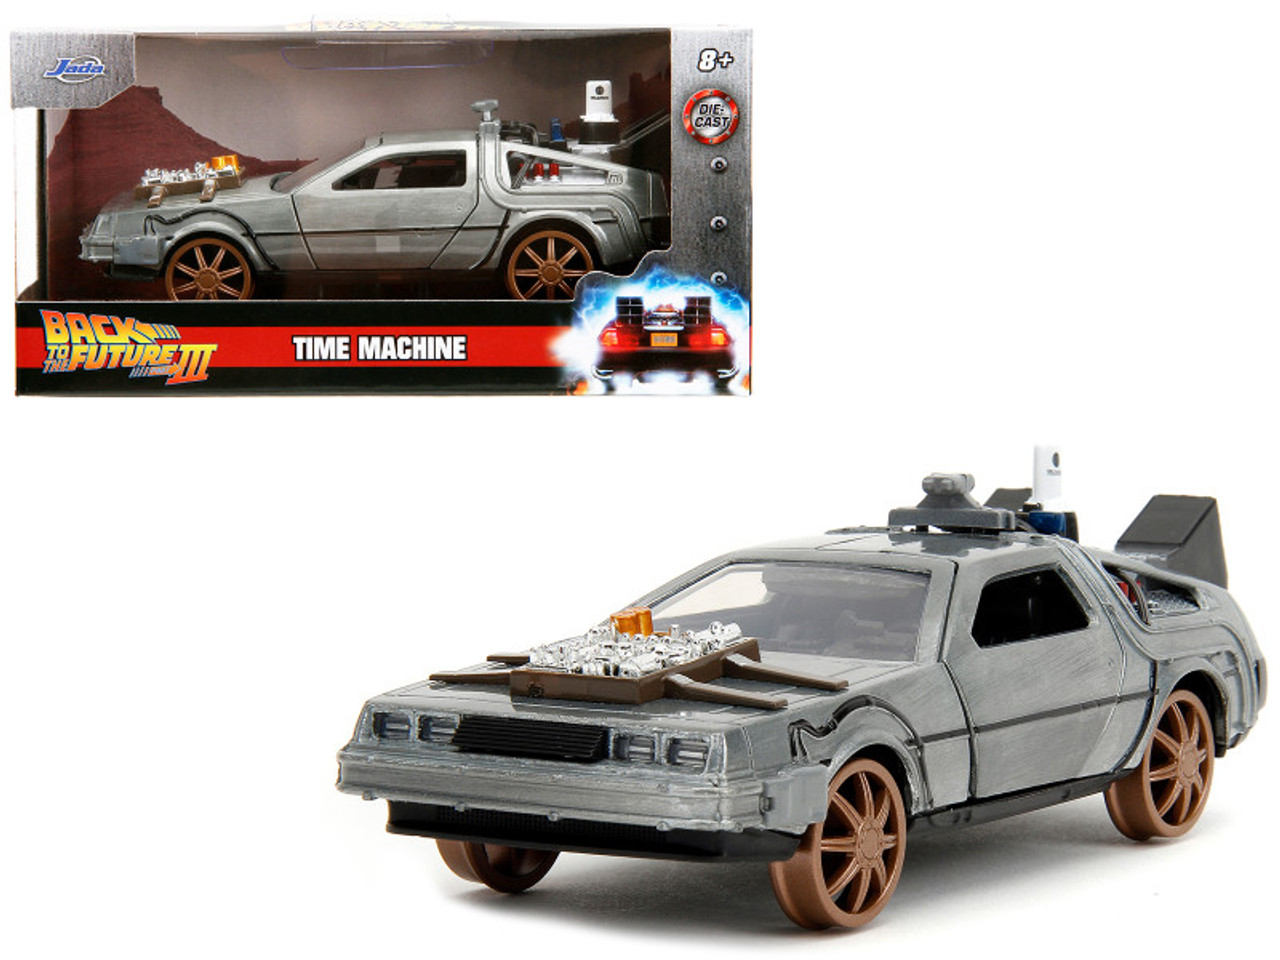 DeLorean DMC (Time Machine) Brushed Metal Train Wheel Version "Back to the Future Part III" (1990) Movie "Hollywood Rides" Series 1/32 Diecast Model Car by Jada